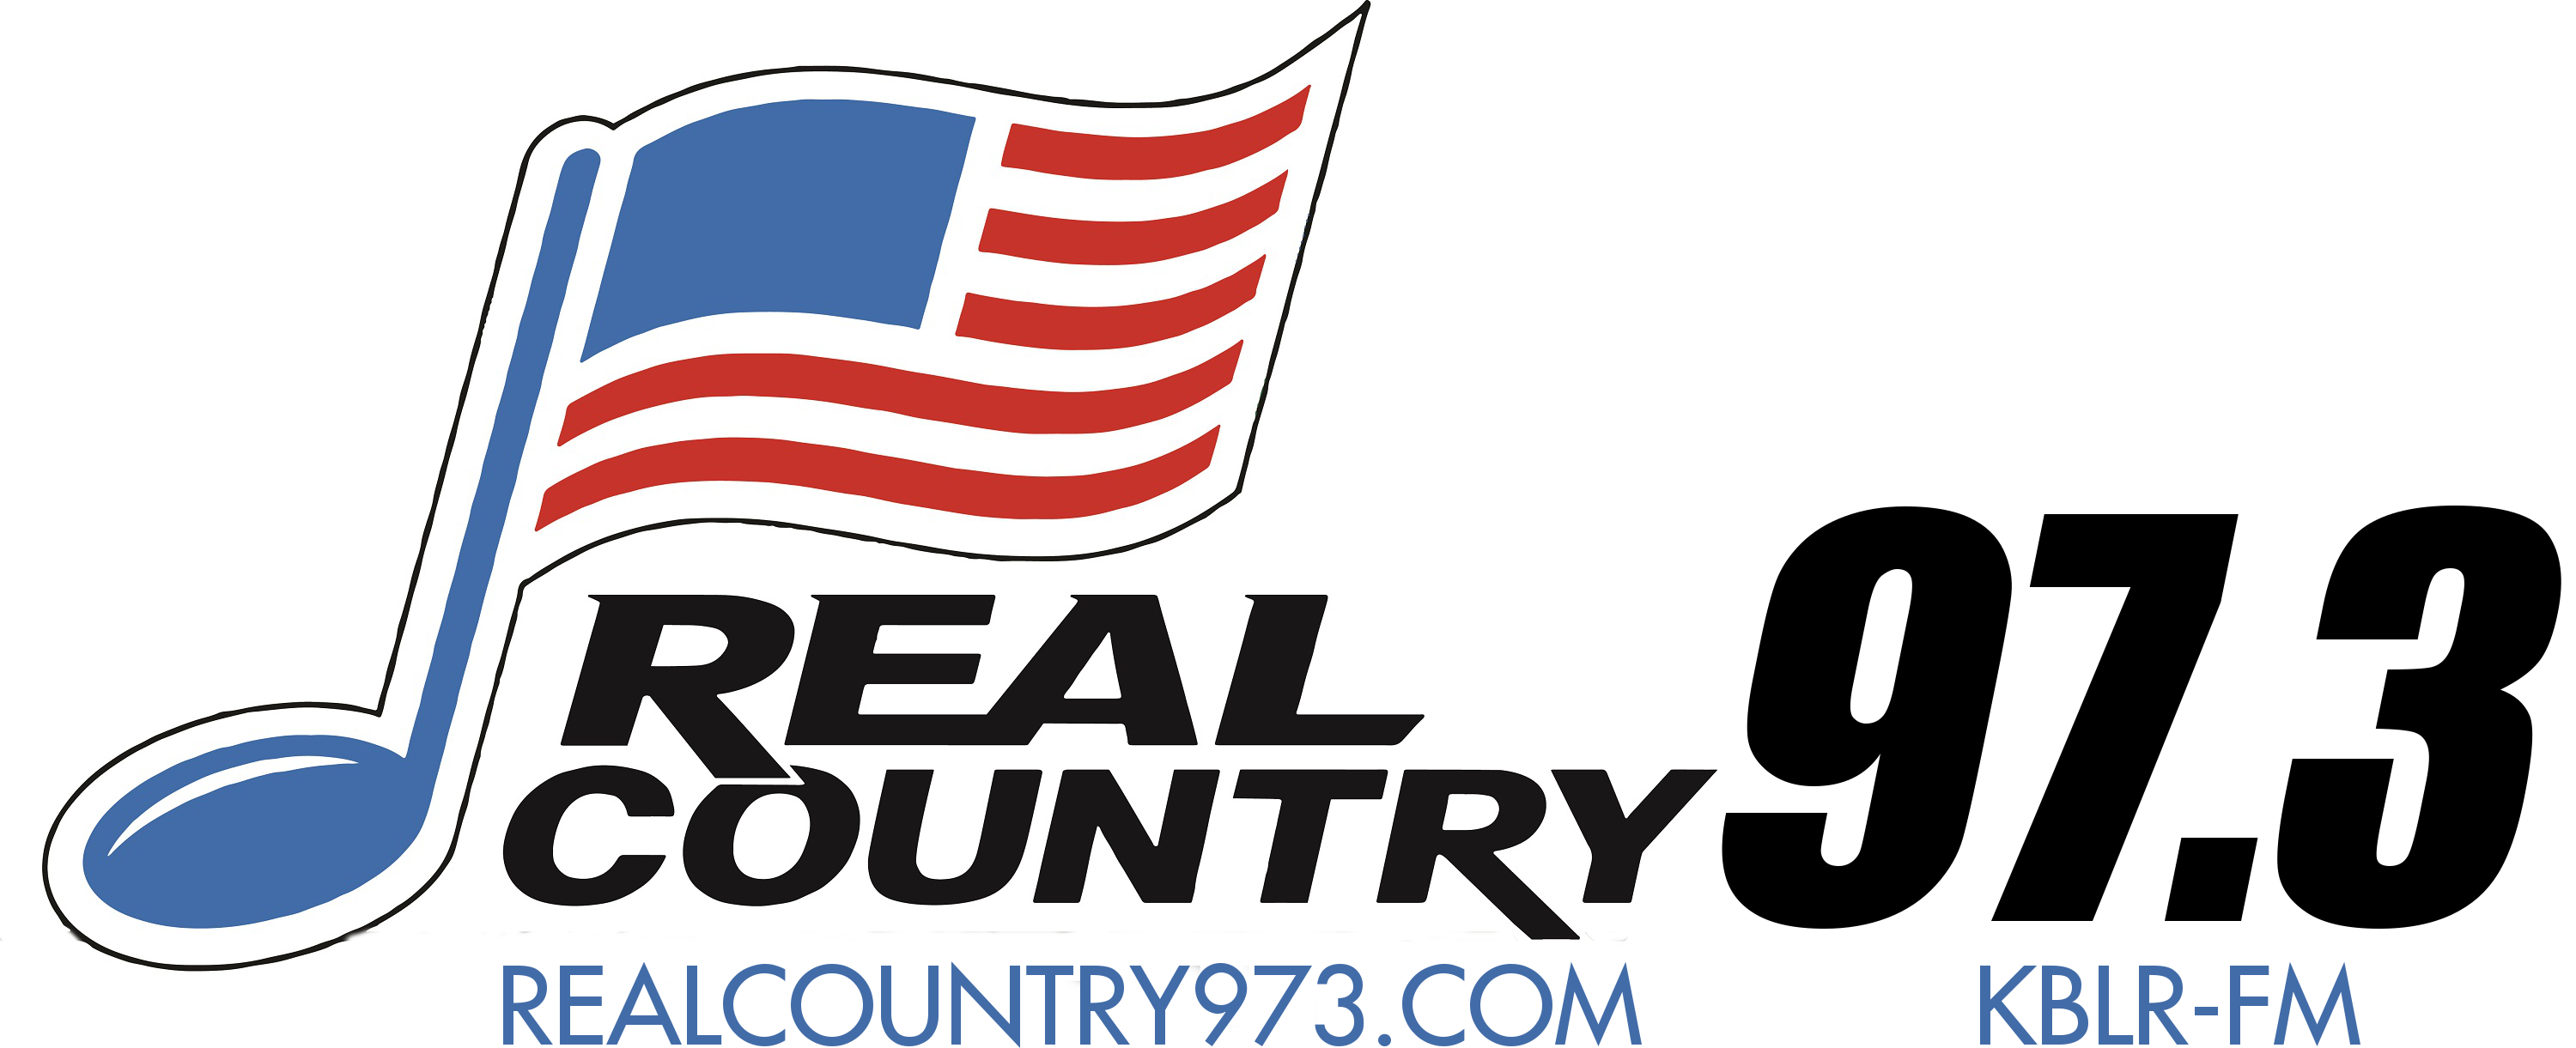 Real Country 97.3 - KBLR